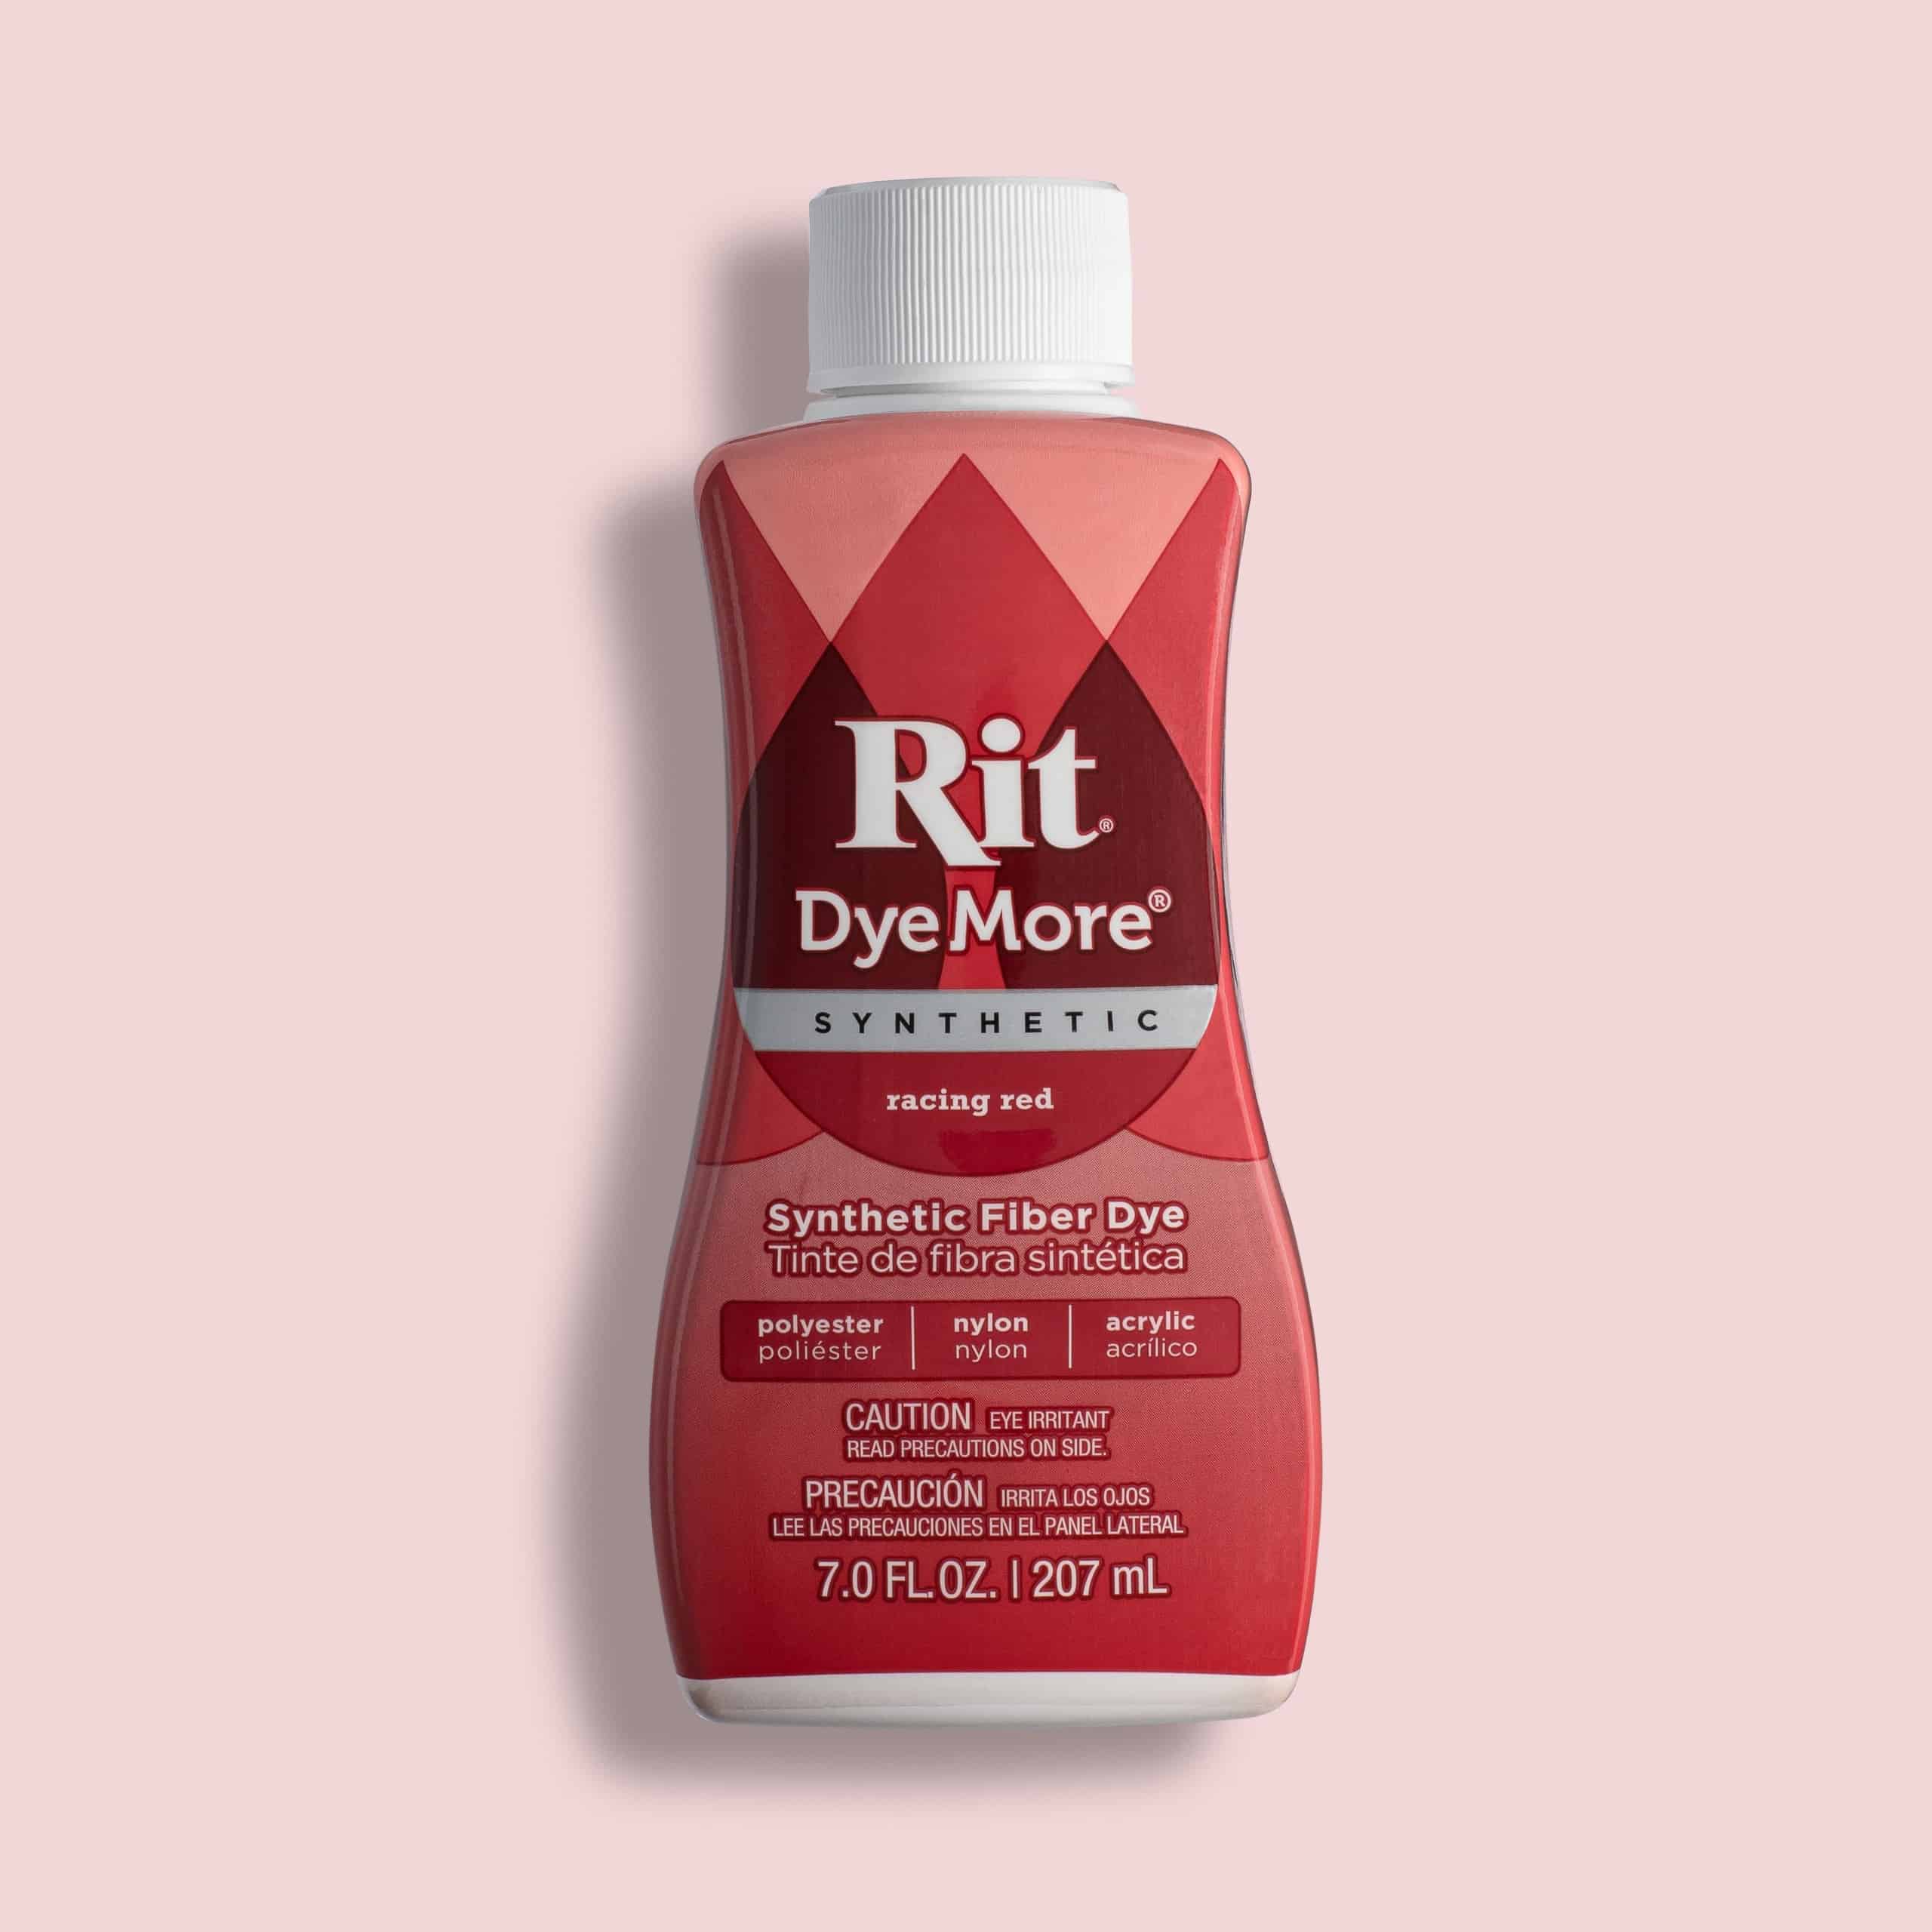 Racing Red DyeMore for Synthetics – Rit Dye